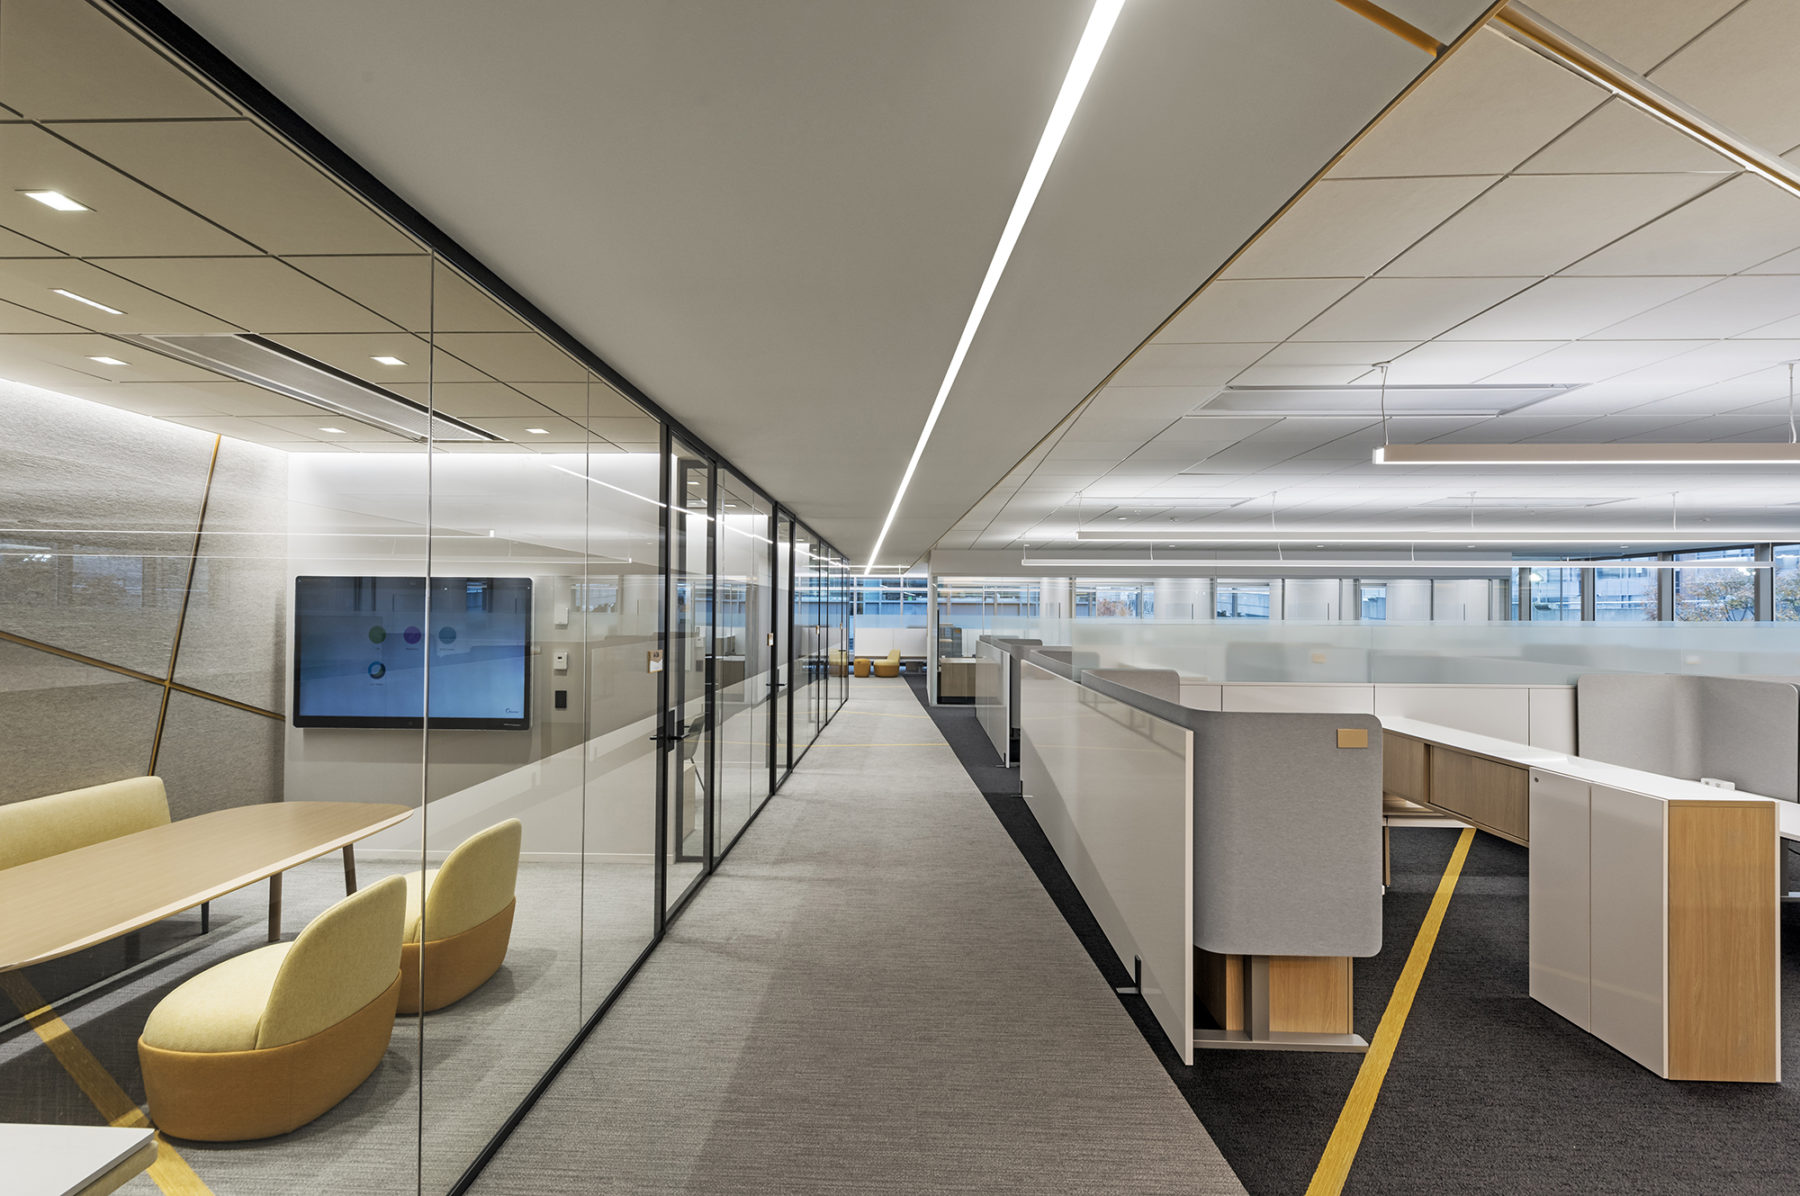 conference rooms line the edge of individual desk areas